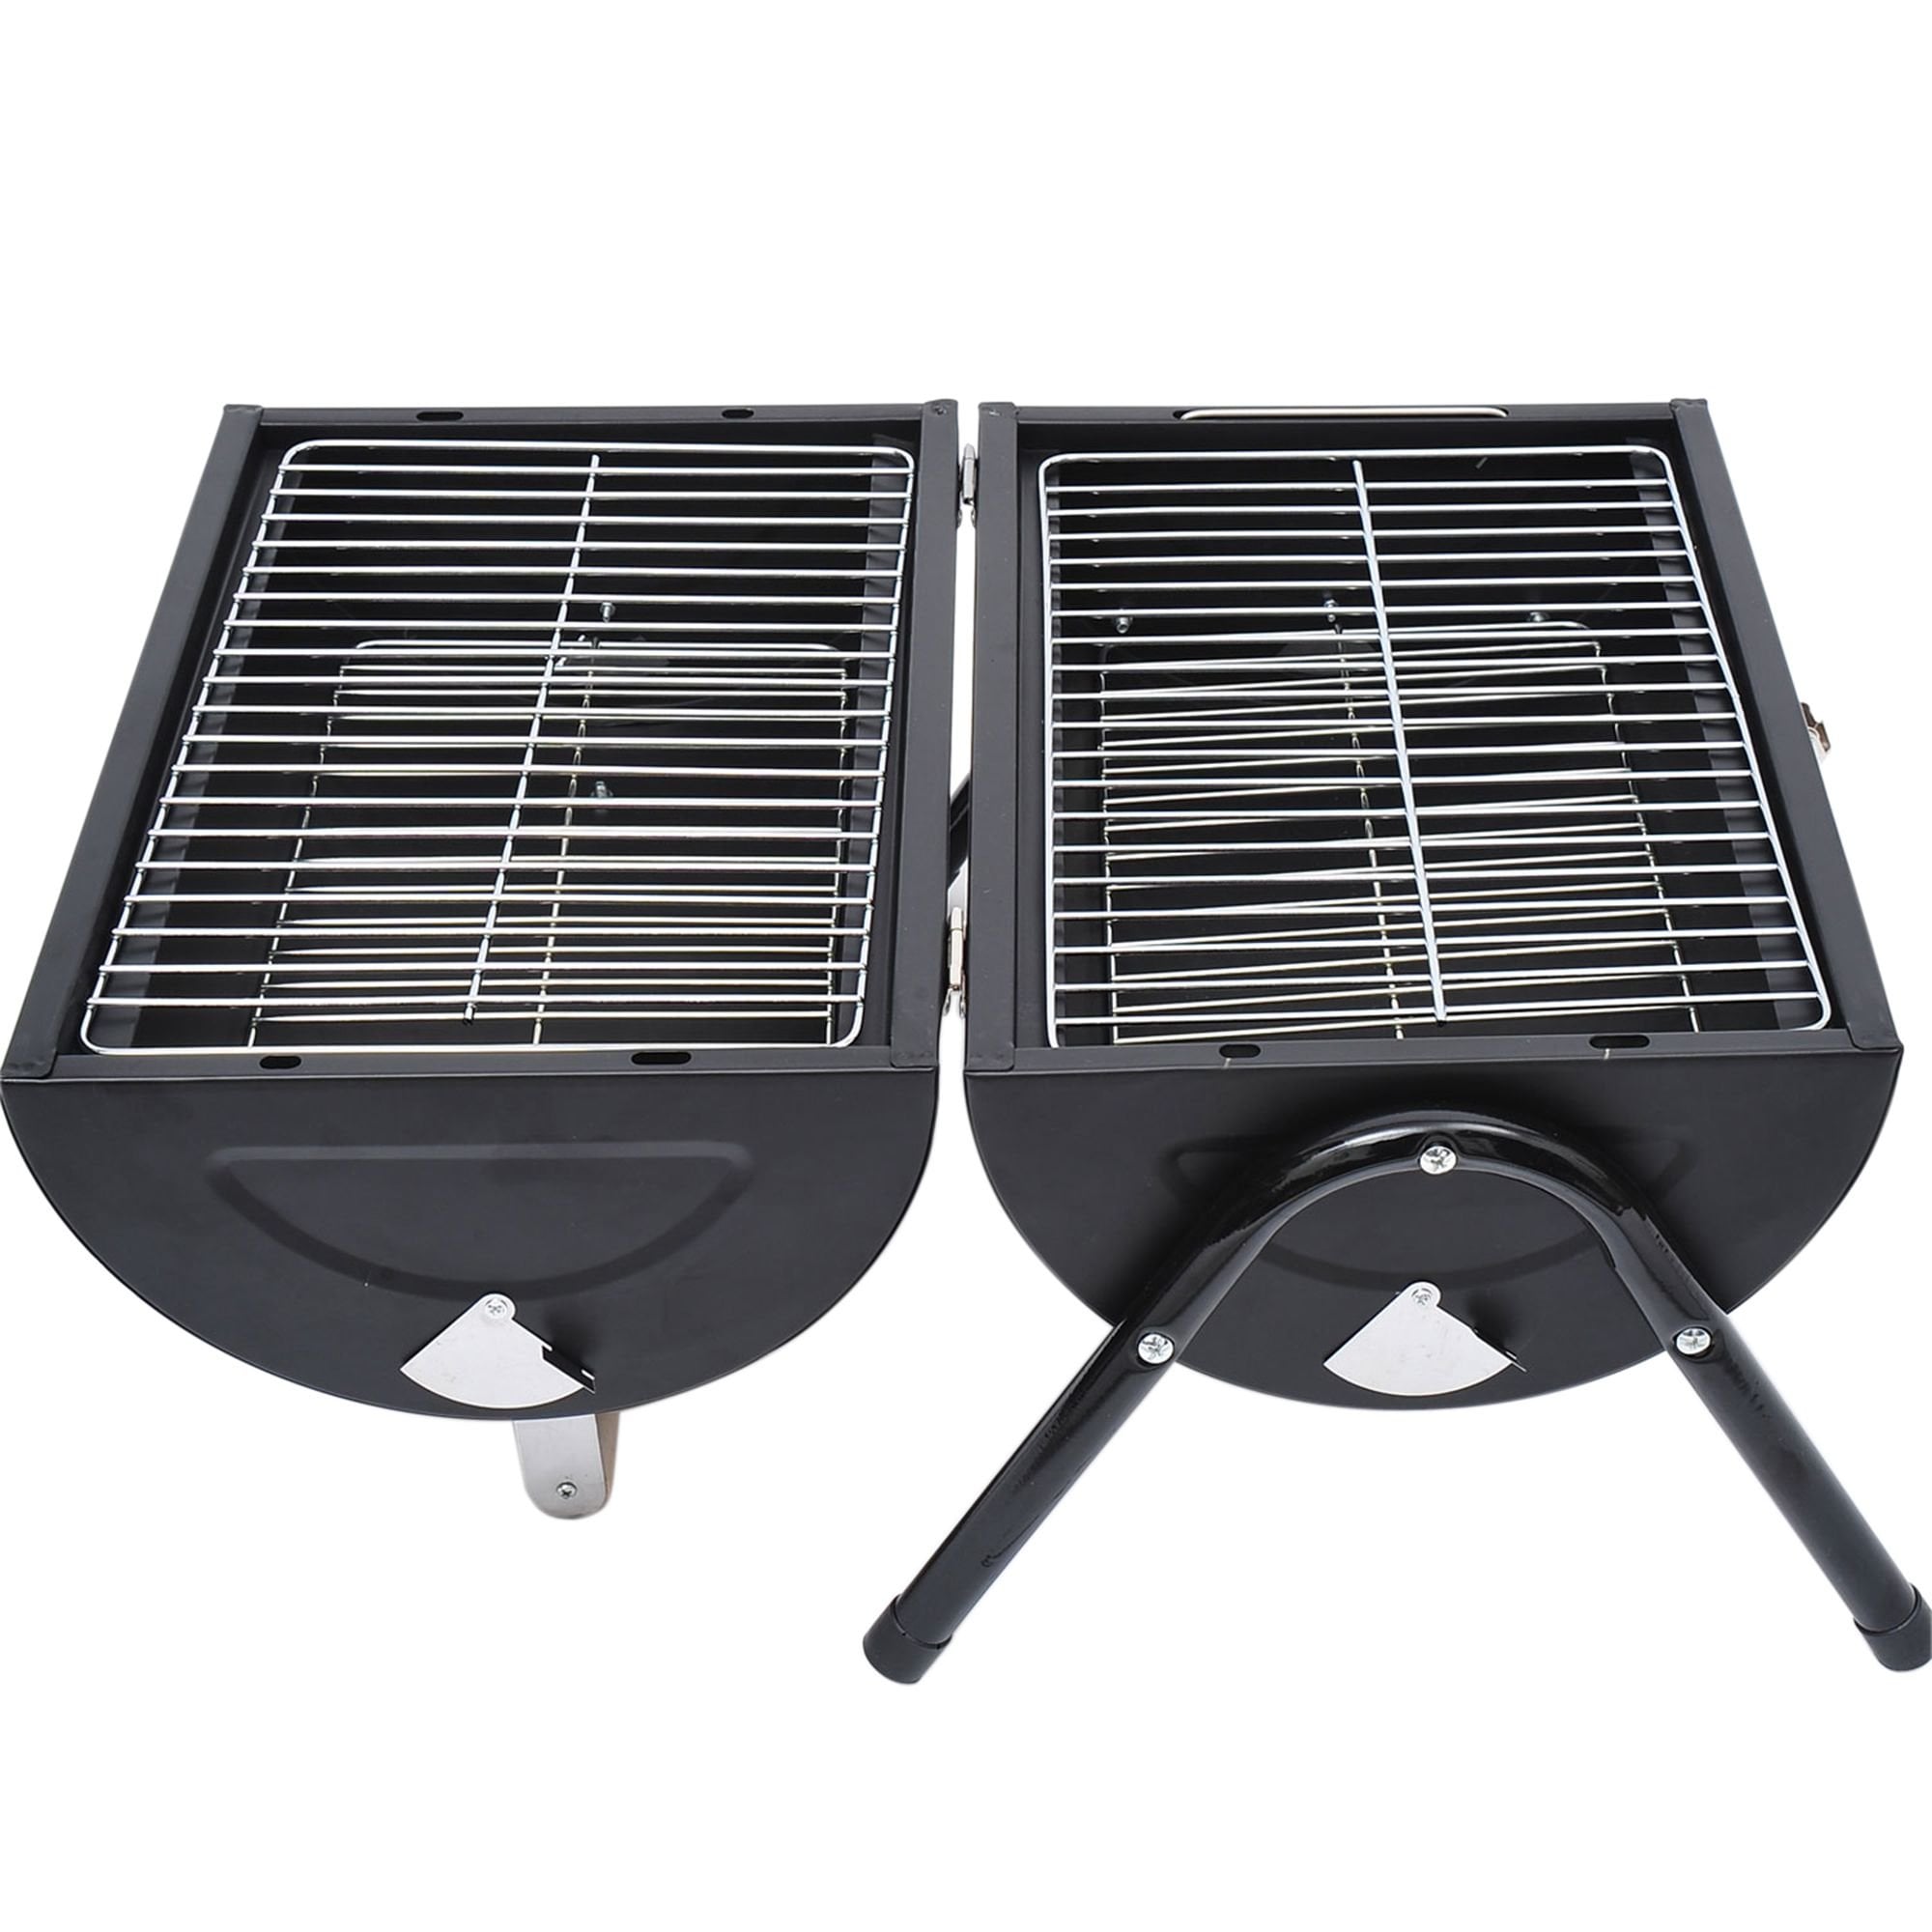 Outsunny Compact Steel Portable Charcoal BBQ Grill - Black  | TJ Hughes